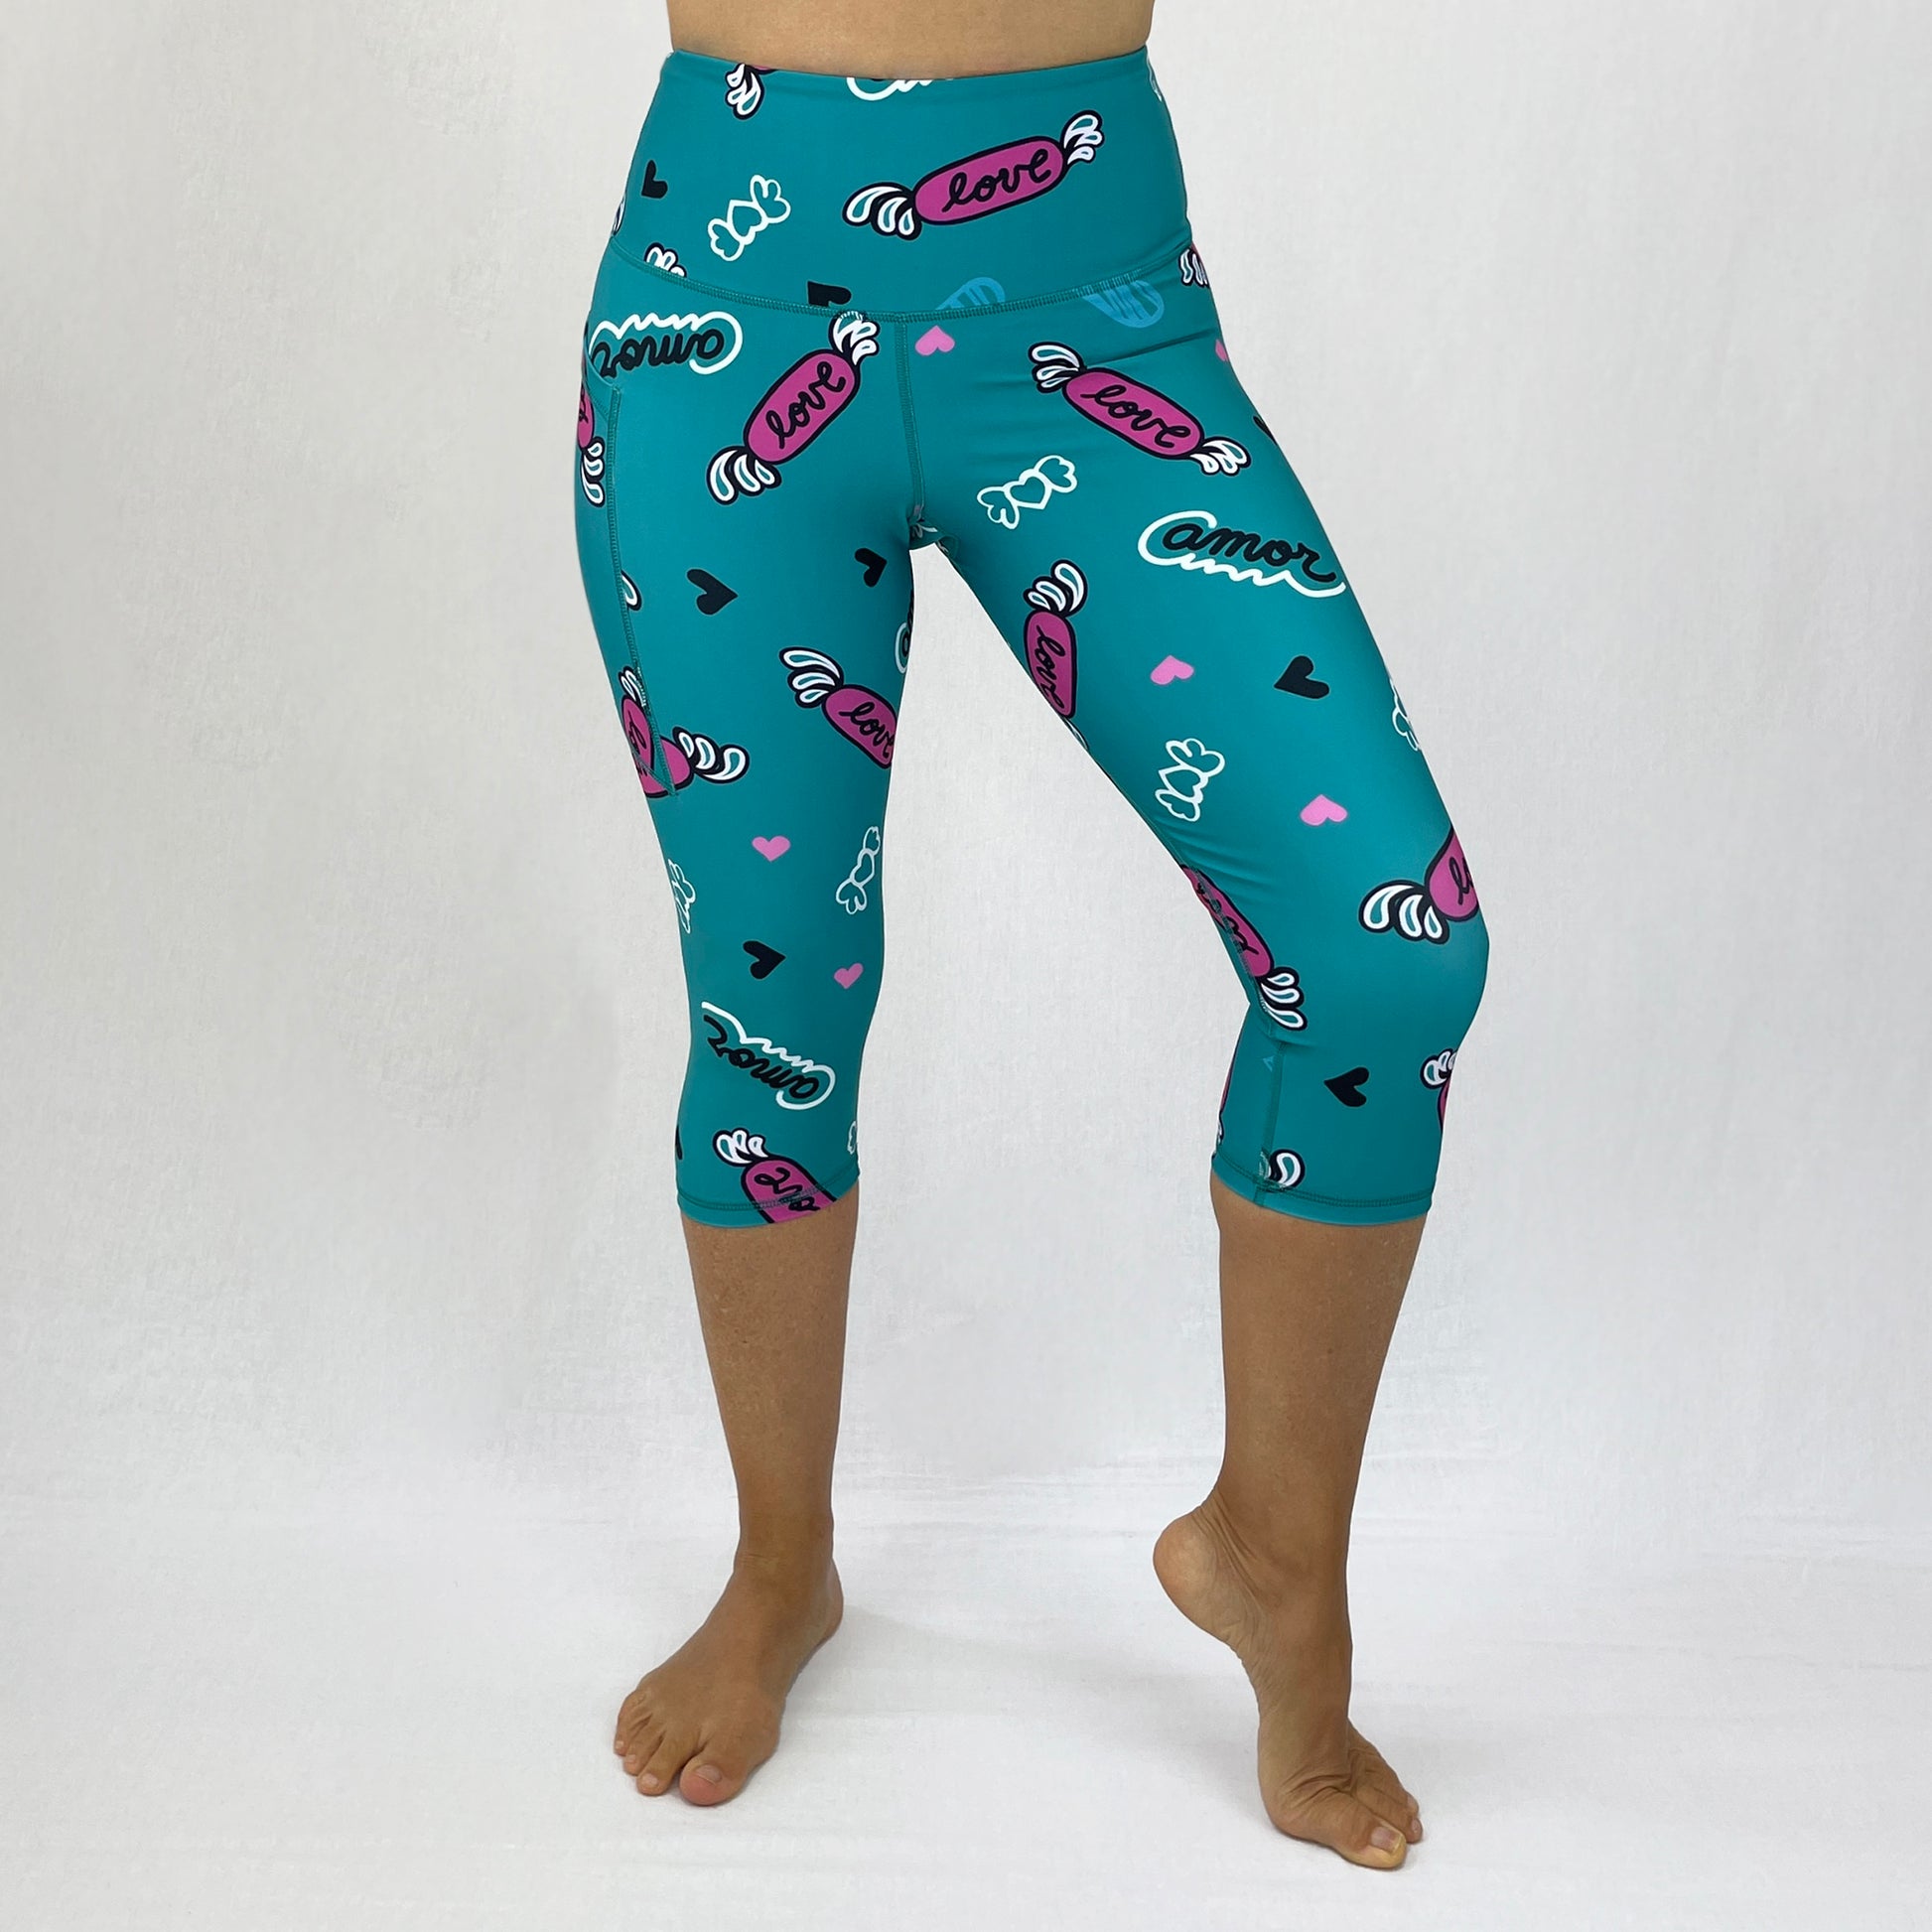 Ethical High Waisted 3/4 length Leggings Oda in Love by Monique Baqués front